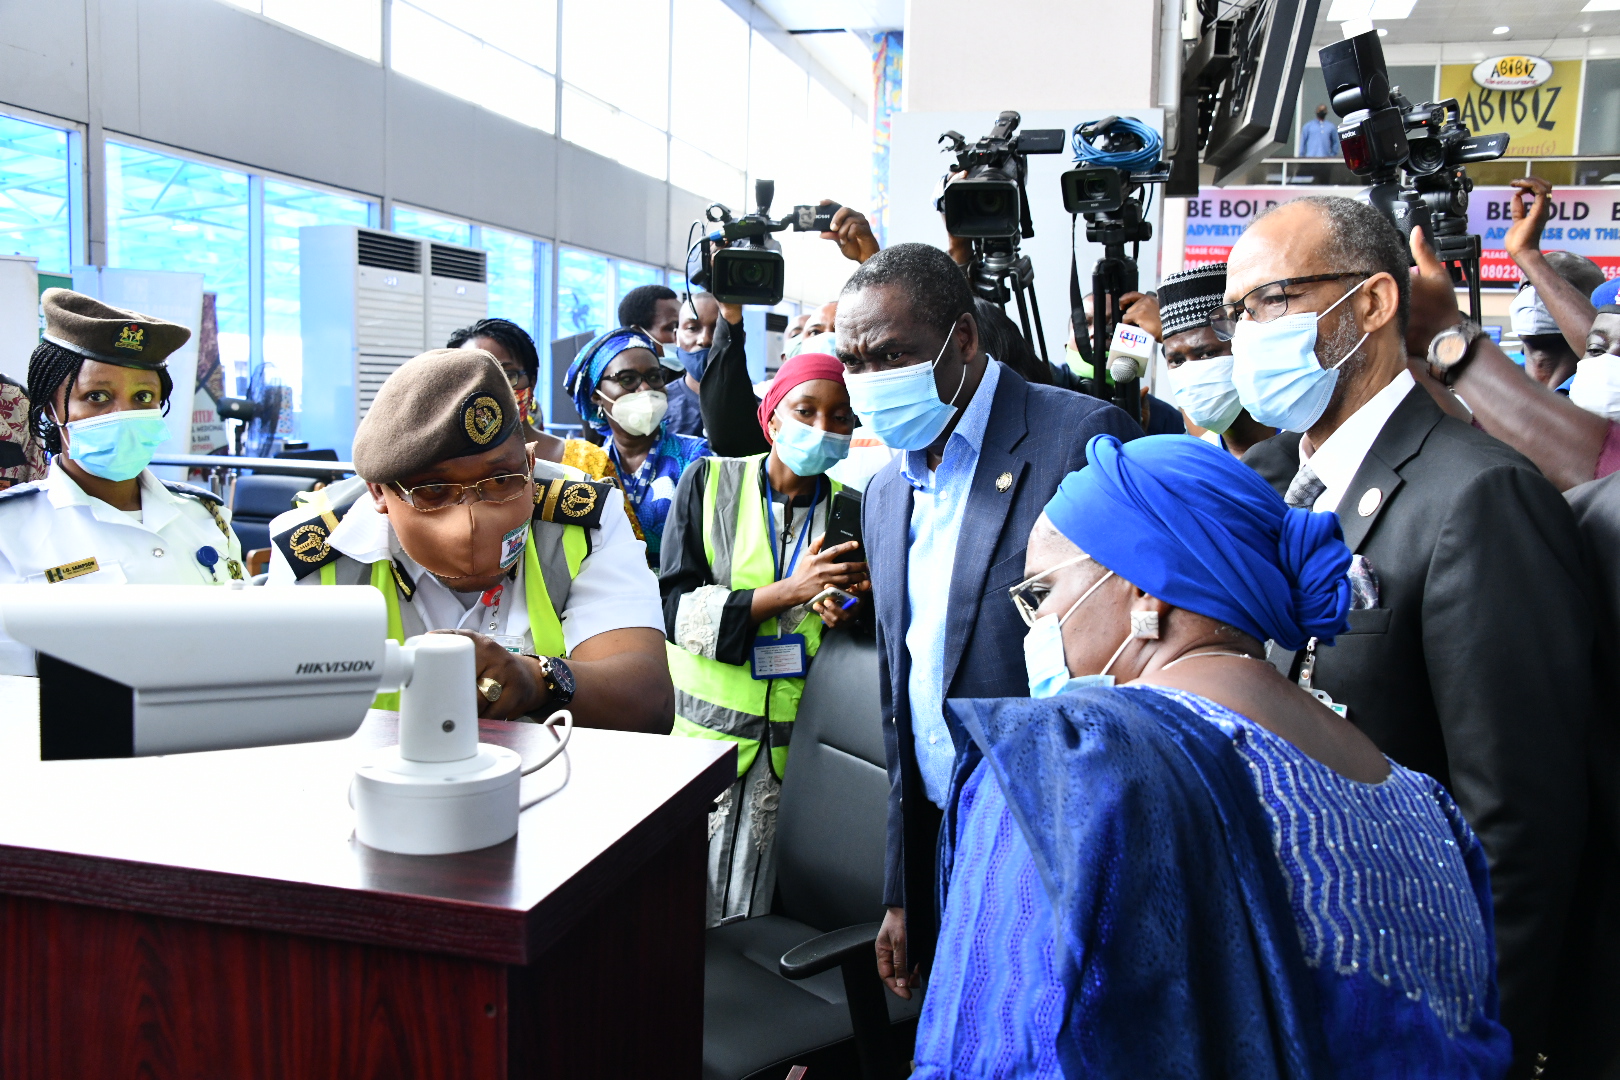 L-R: Assistant Director, Environmental Health Services, Mr. Tella Richard Adeyemi; Lagos State Deputy Governor, Dr. Obafemi Hamzat; Commissioner for Health, Prof. Akin Abayomi and Secretary to the State Government, Mrs. Folasade Jaji during an inspection of the Murtala Muhammed International Airport ahead of international flights resumption, on Friday, September 4, 2020.